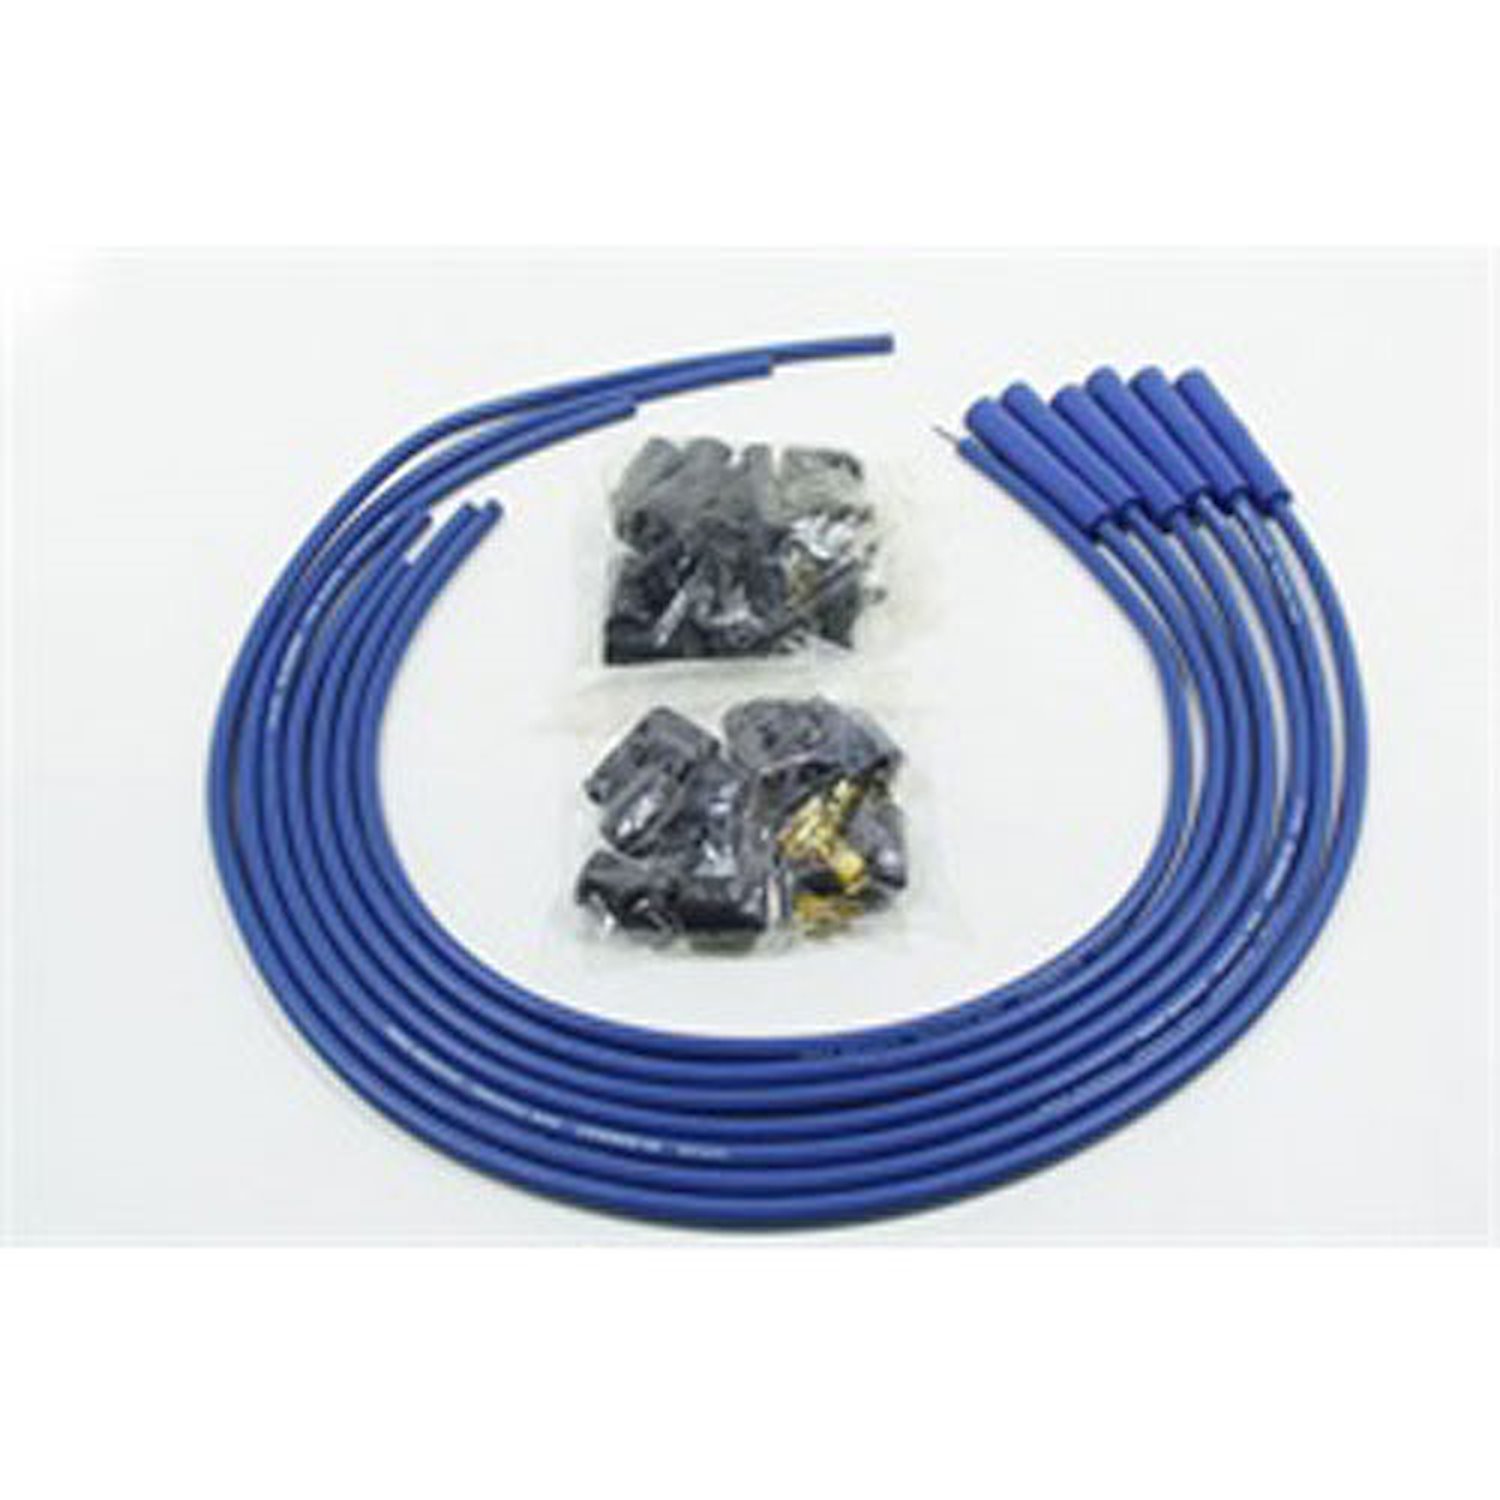 High Energy 8mm Spark Plug Wires Universal Fit, 6-Cylinder